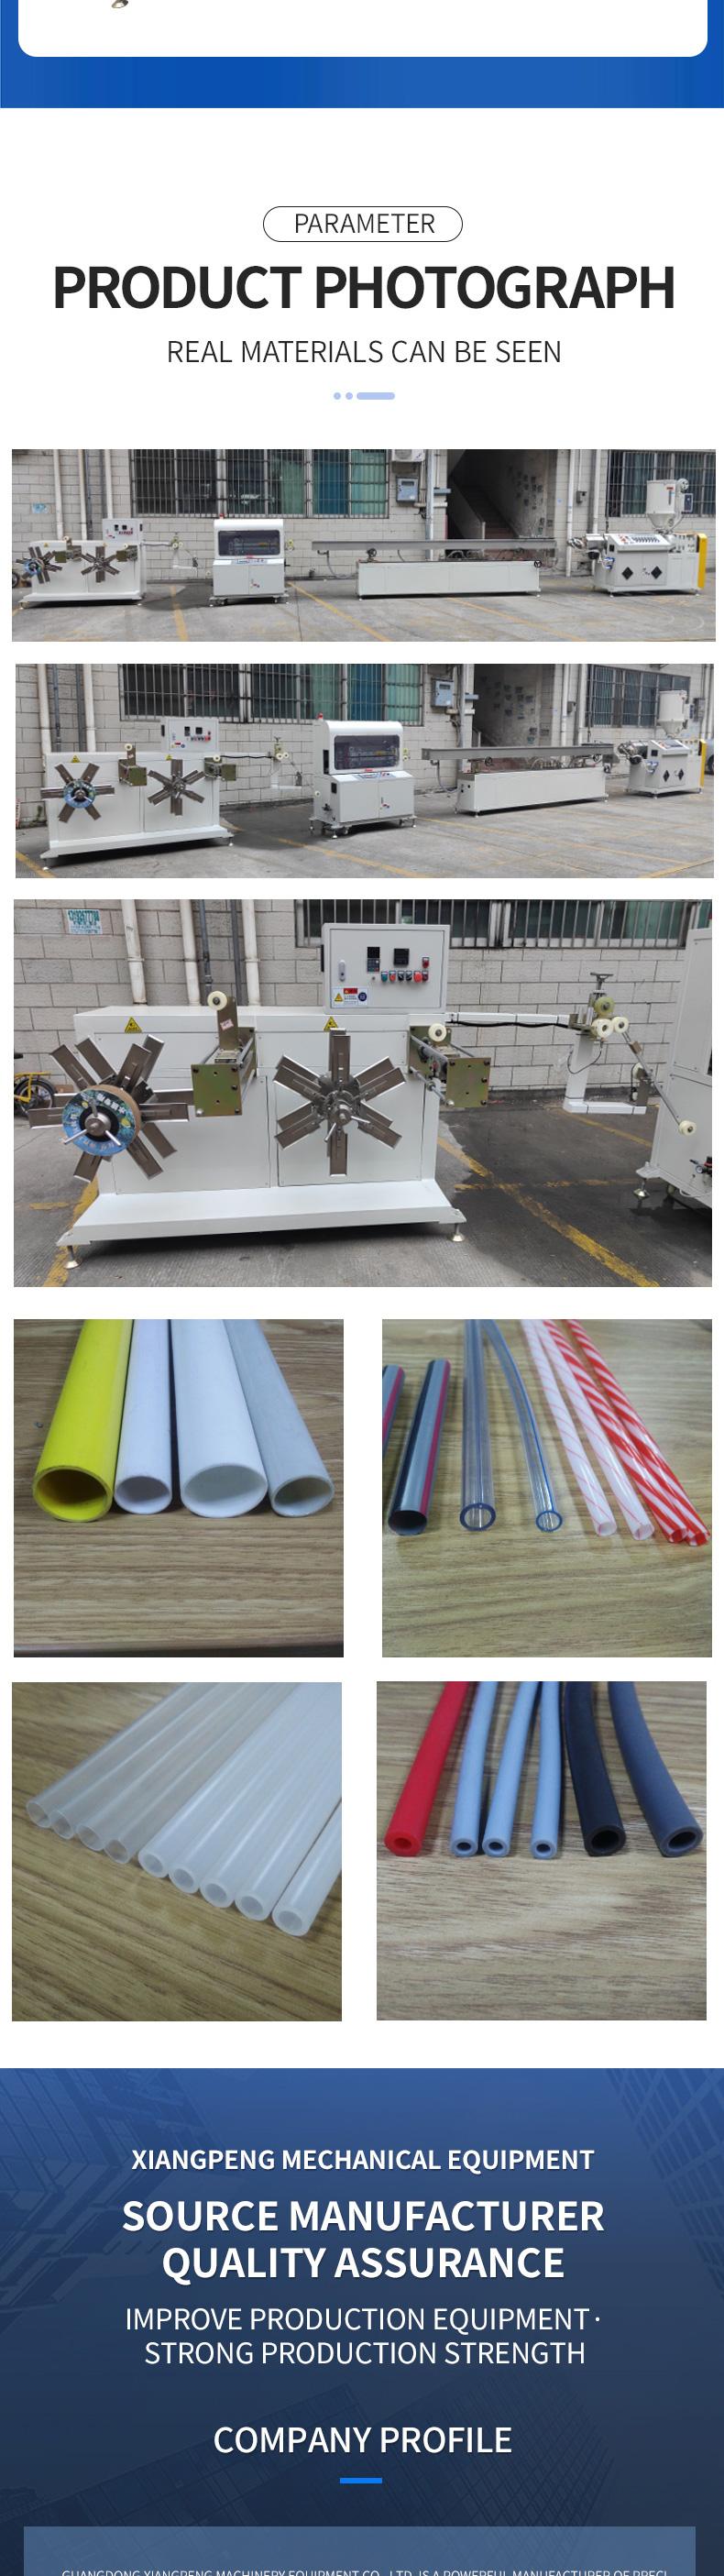 Xiangpeng PVC pipe equipment has a precise structure, long service life, adjustable thickness, and a wide range of uses